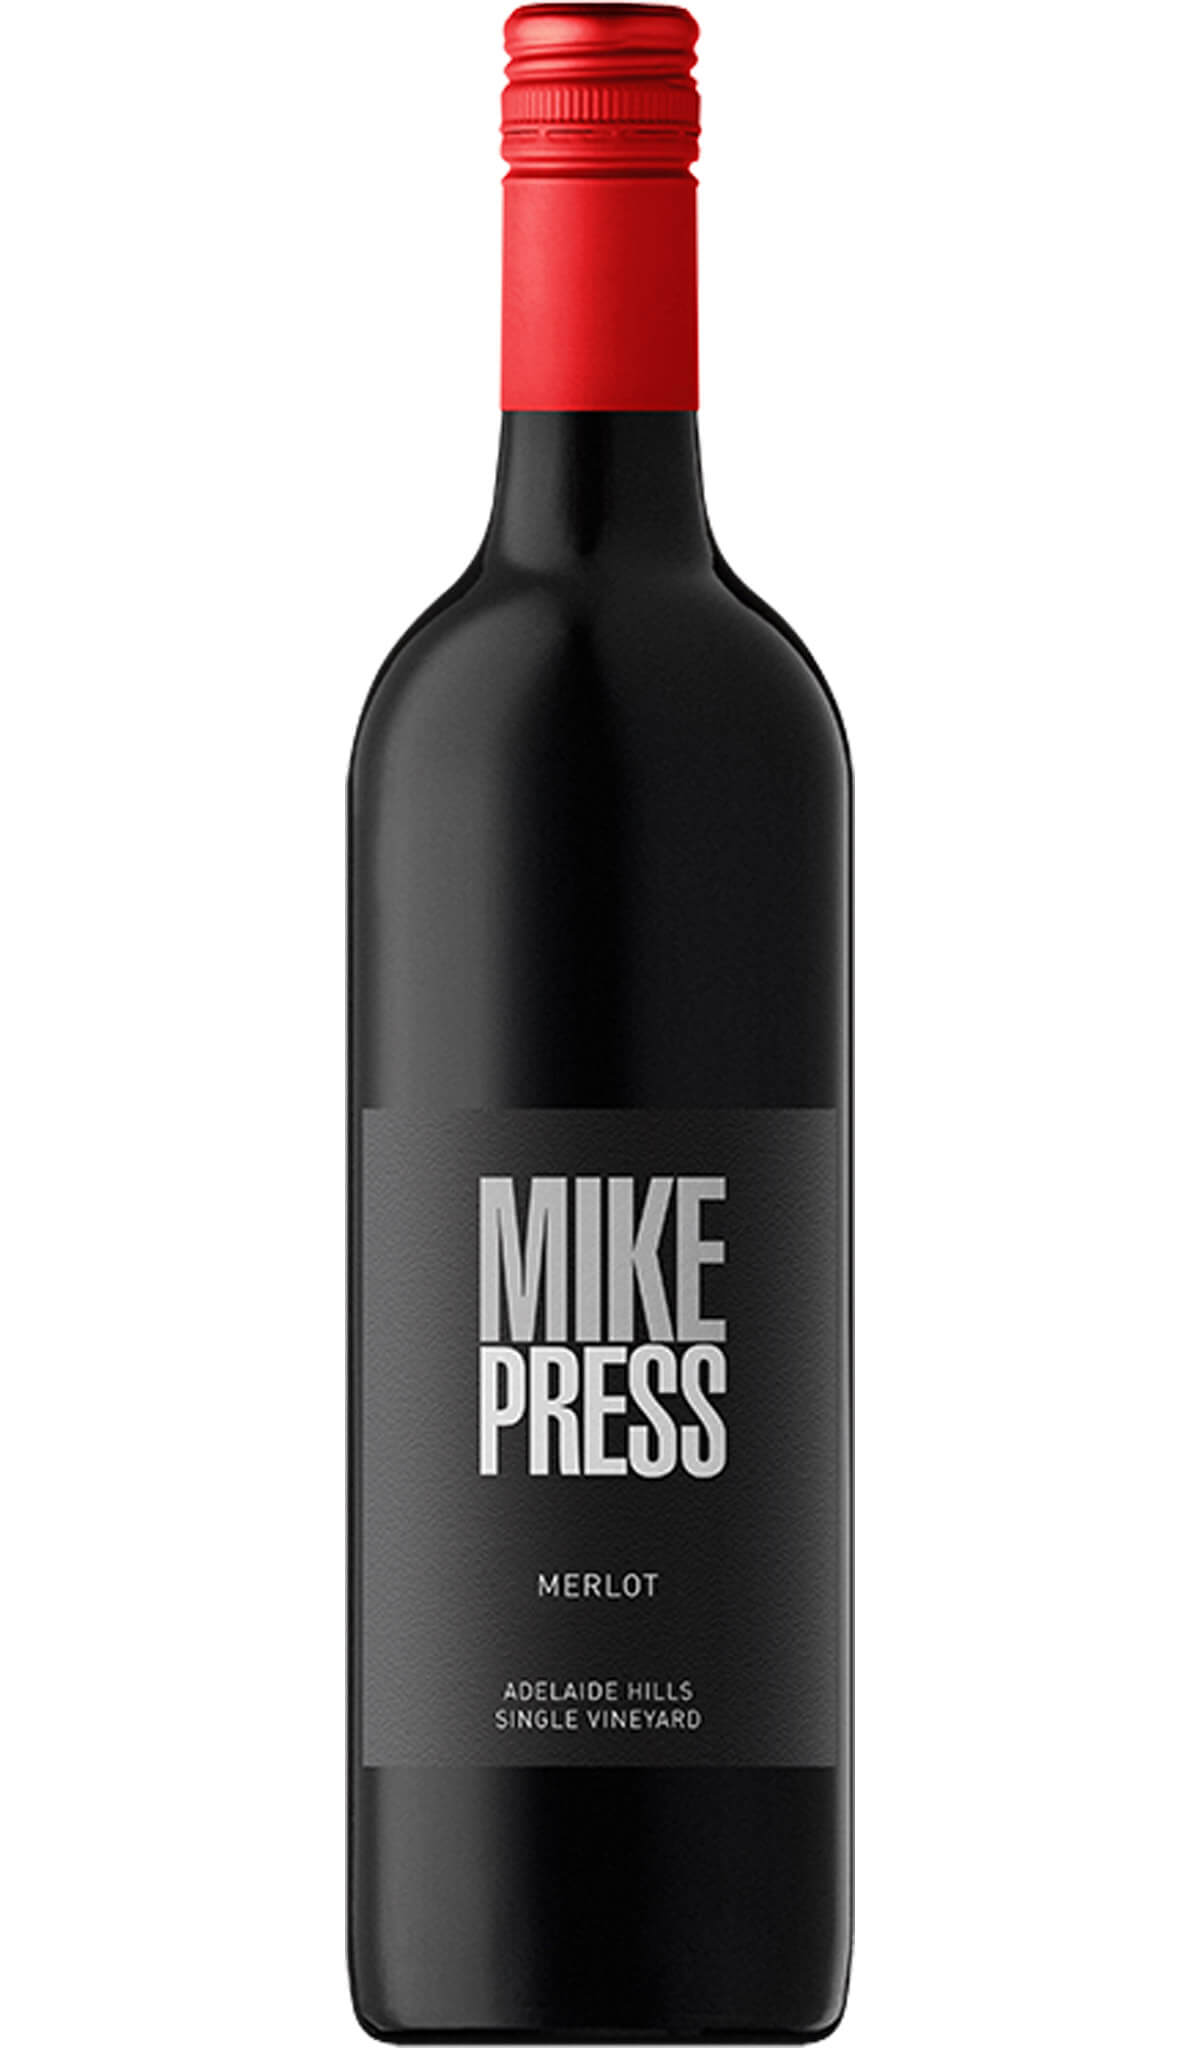 Find out more or buy Mike Press Adelaide Hills Merlot 2021 online at Wine Sellers Direct - Australia’s independent liquor specialists.